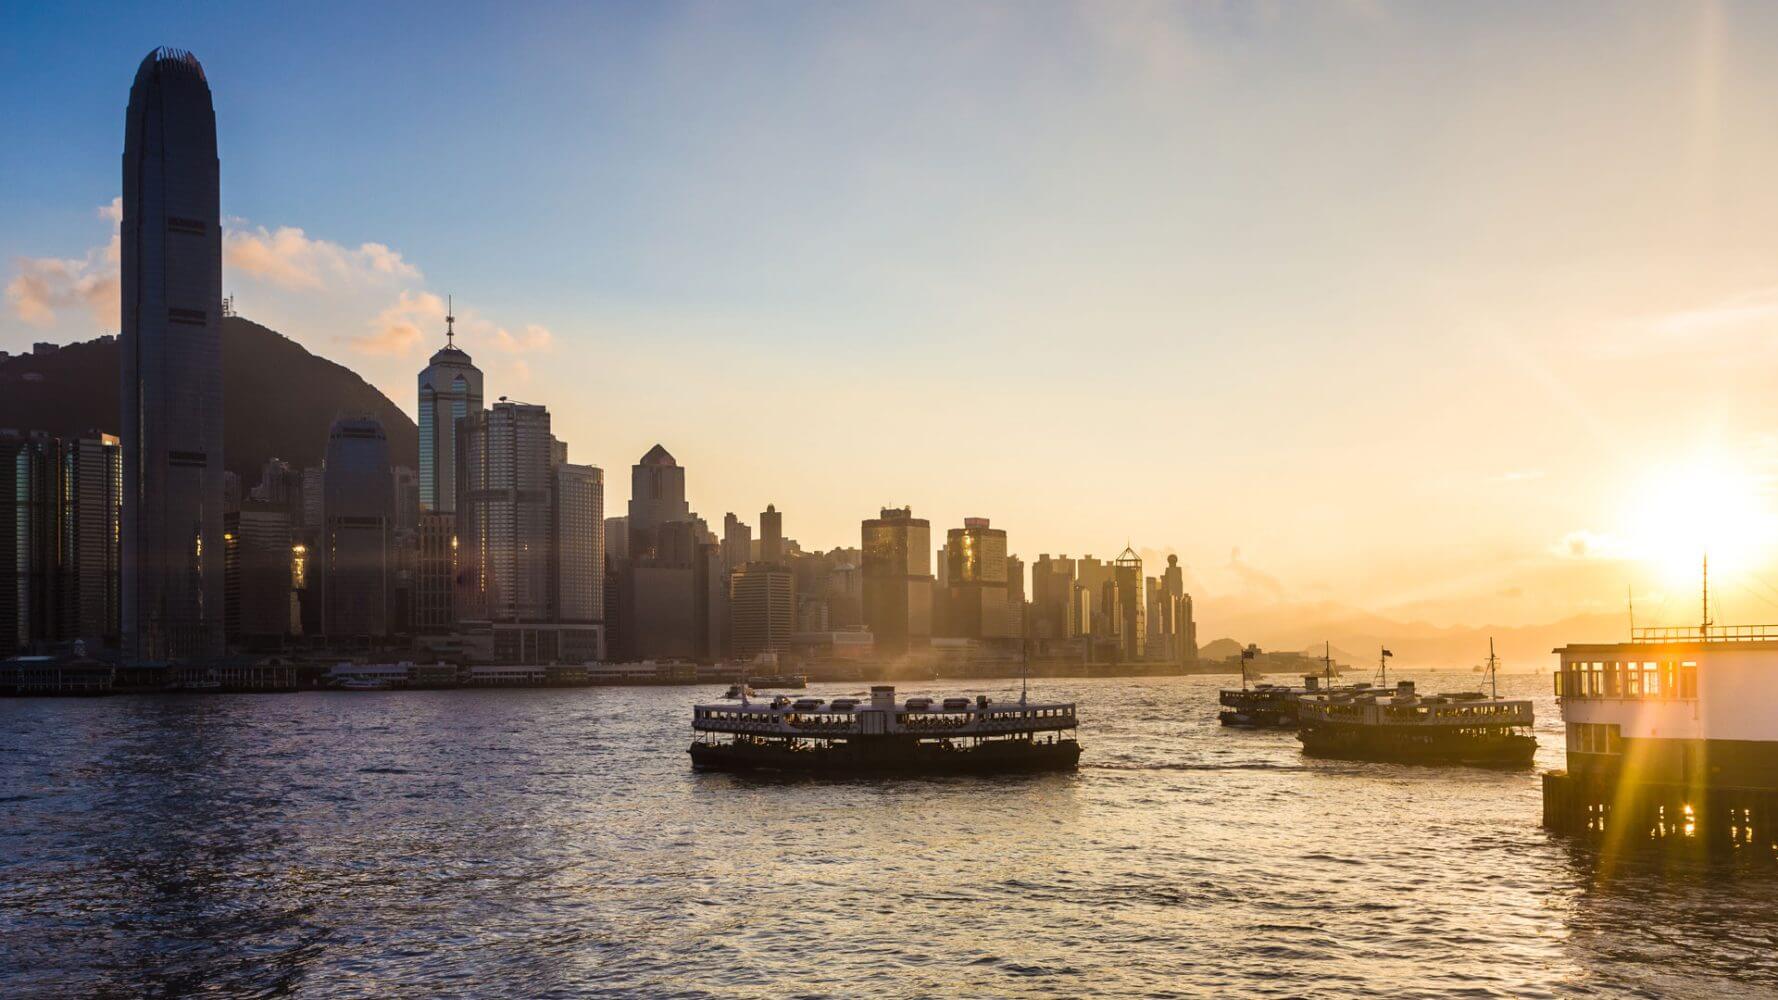 Sunset over Victoria harbor in Hong Kong